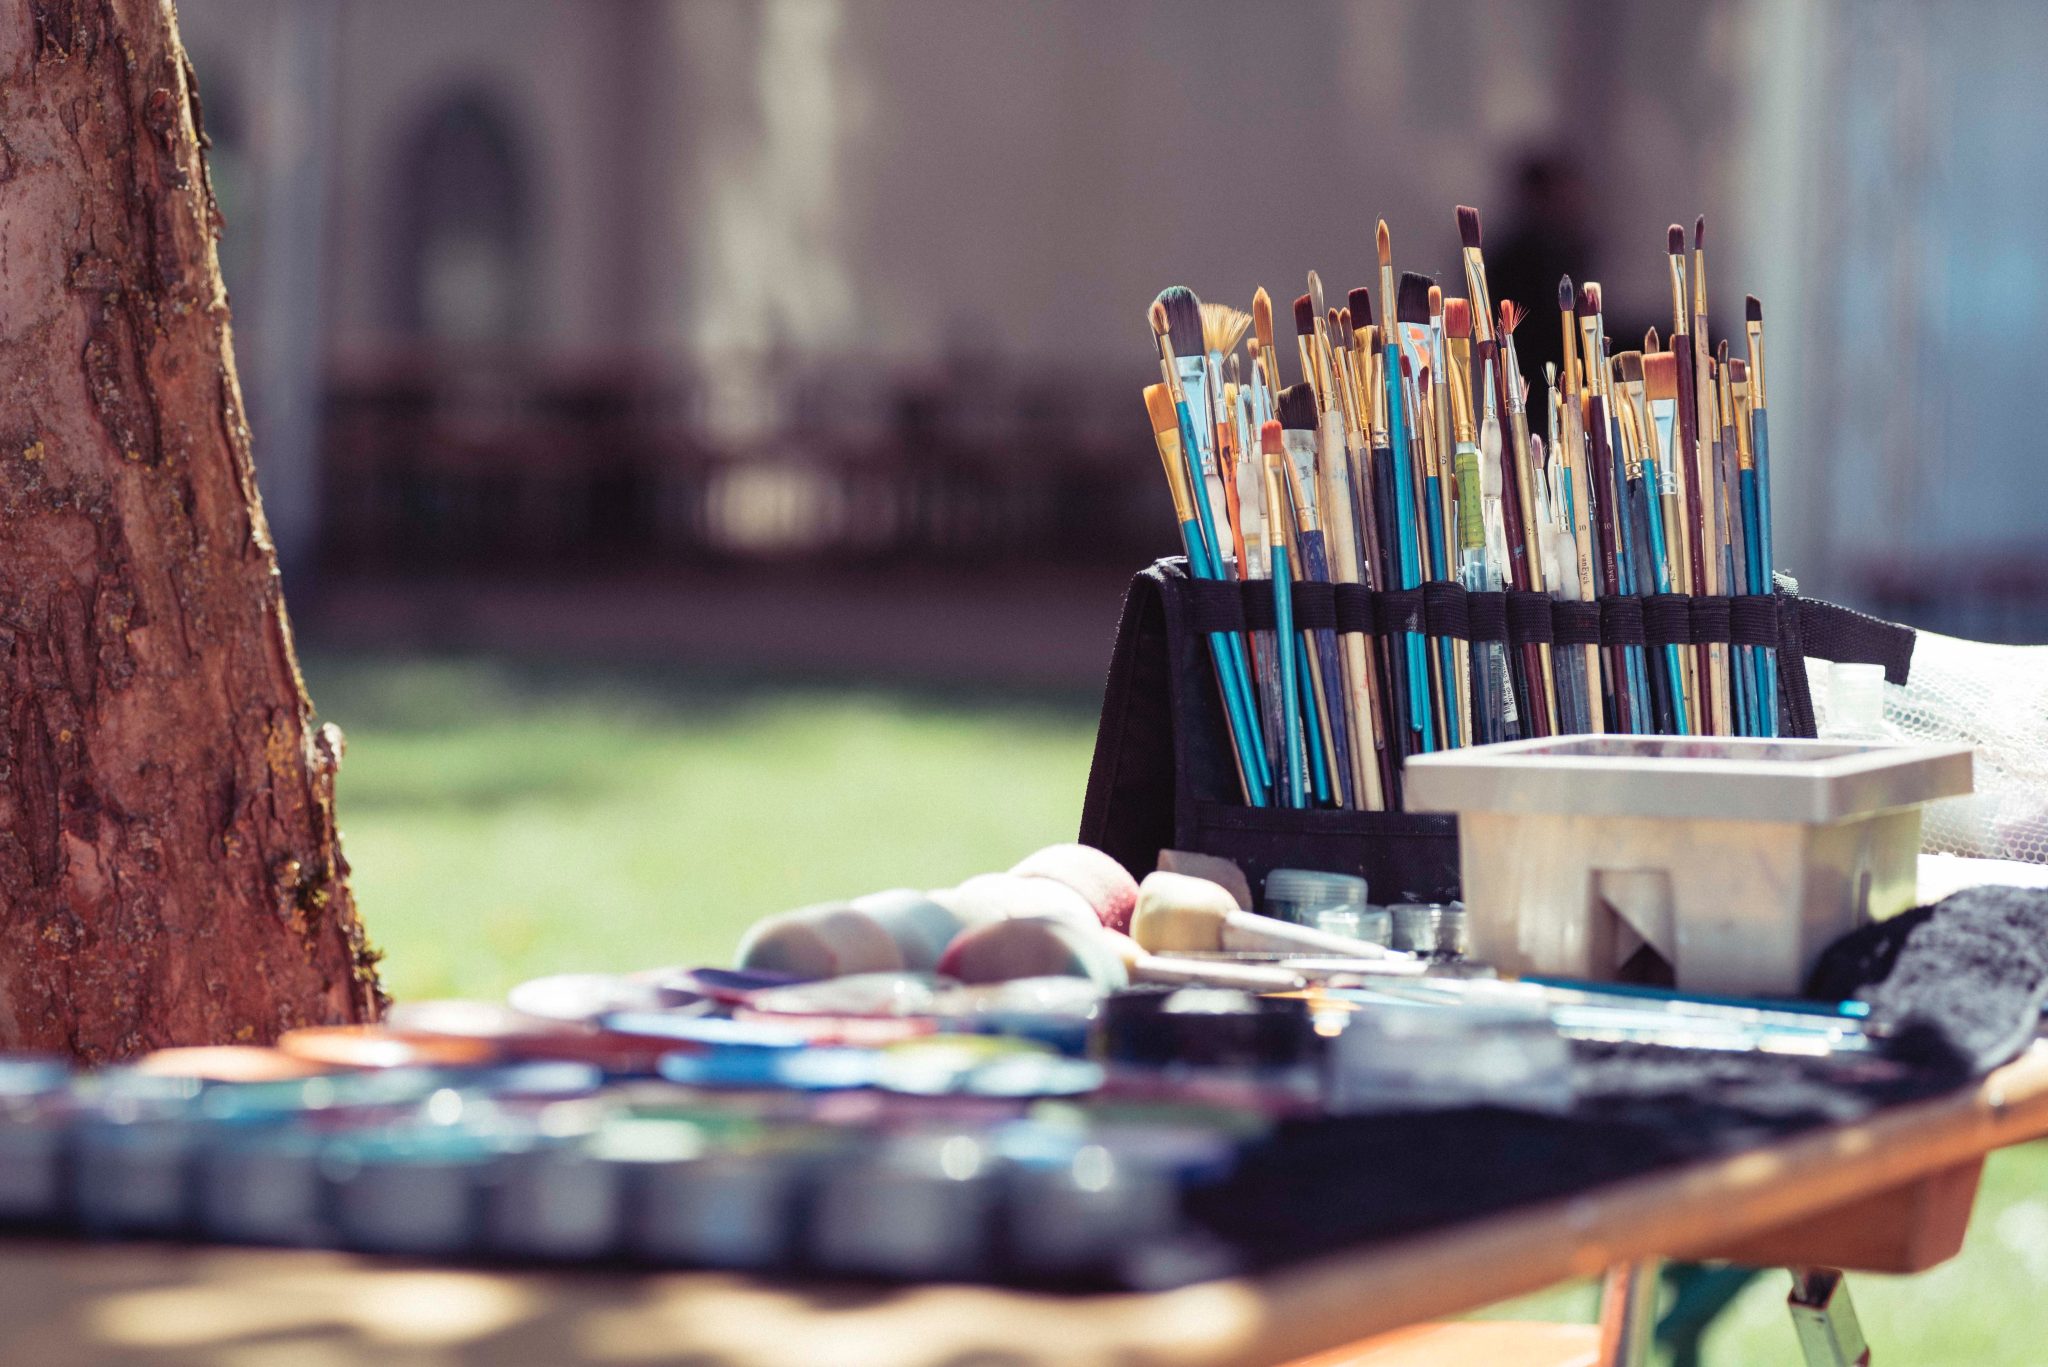 A set of paint brushes and paints on a table near a tree outdoors